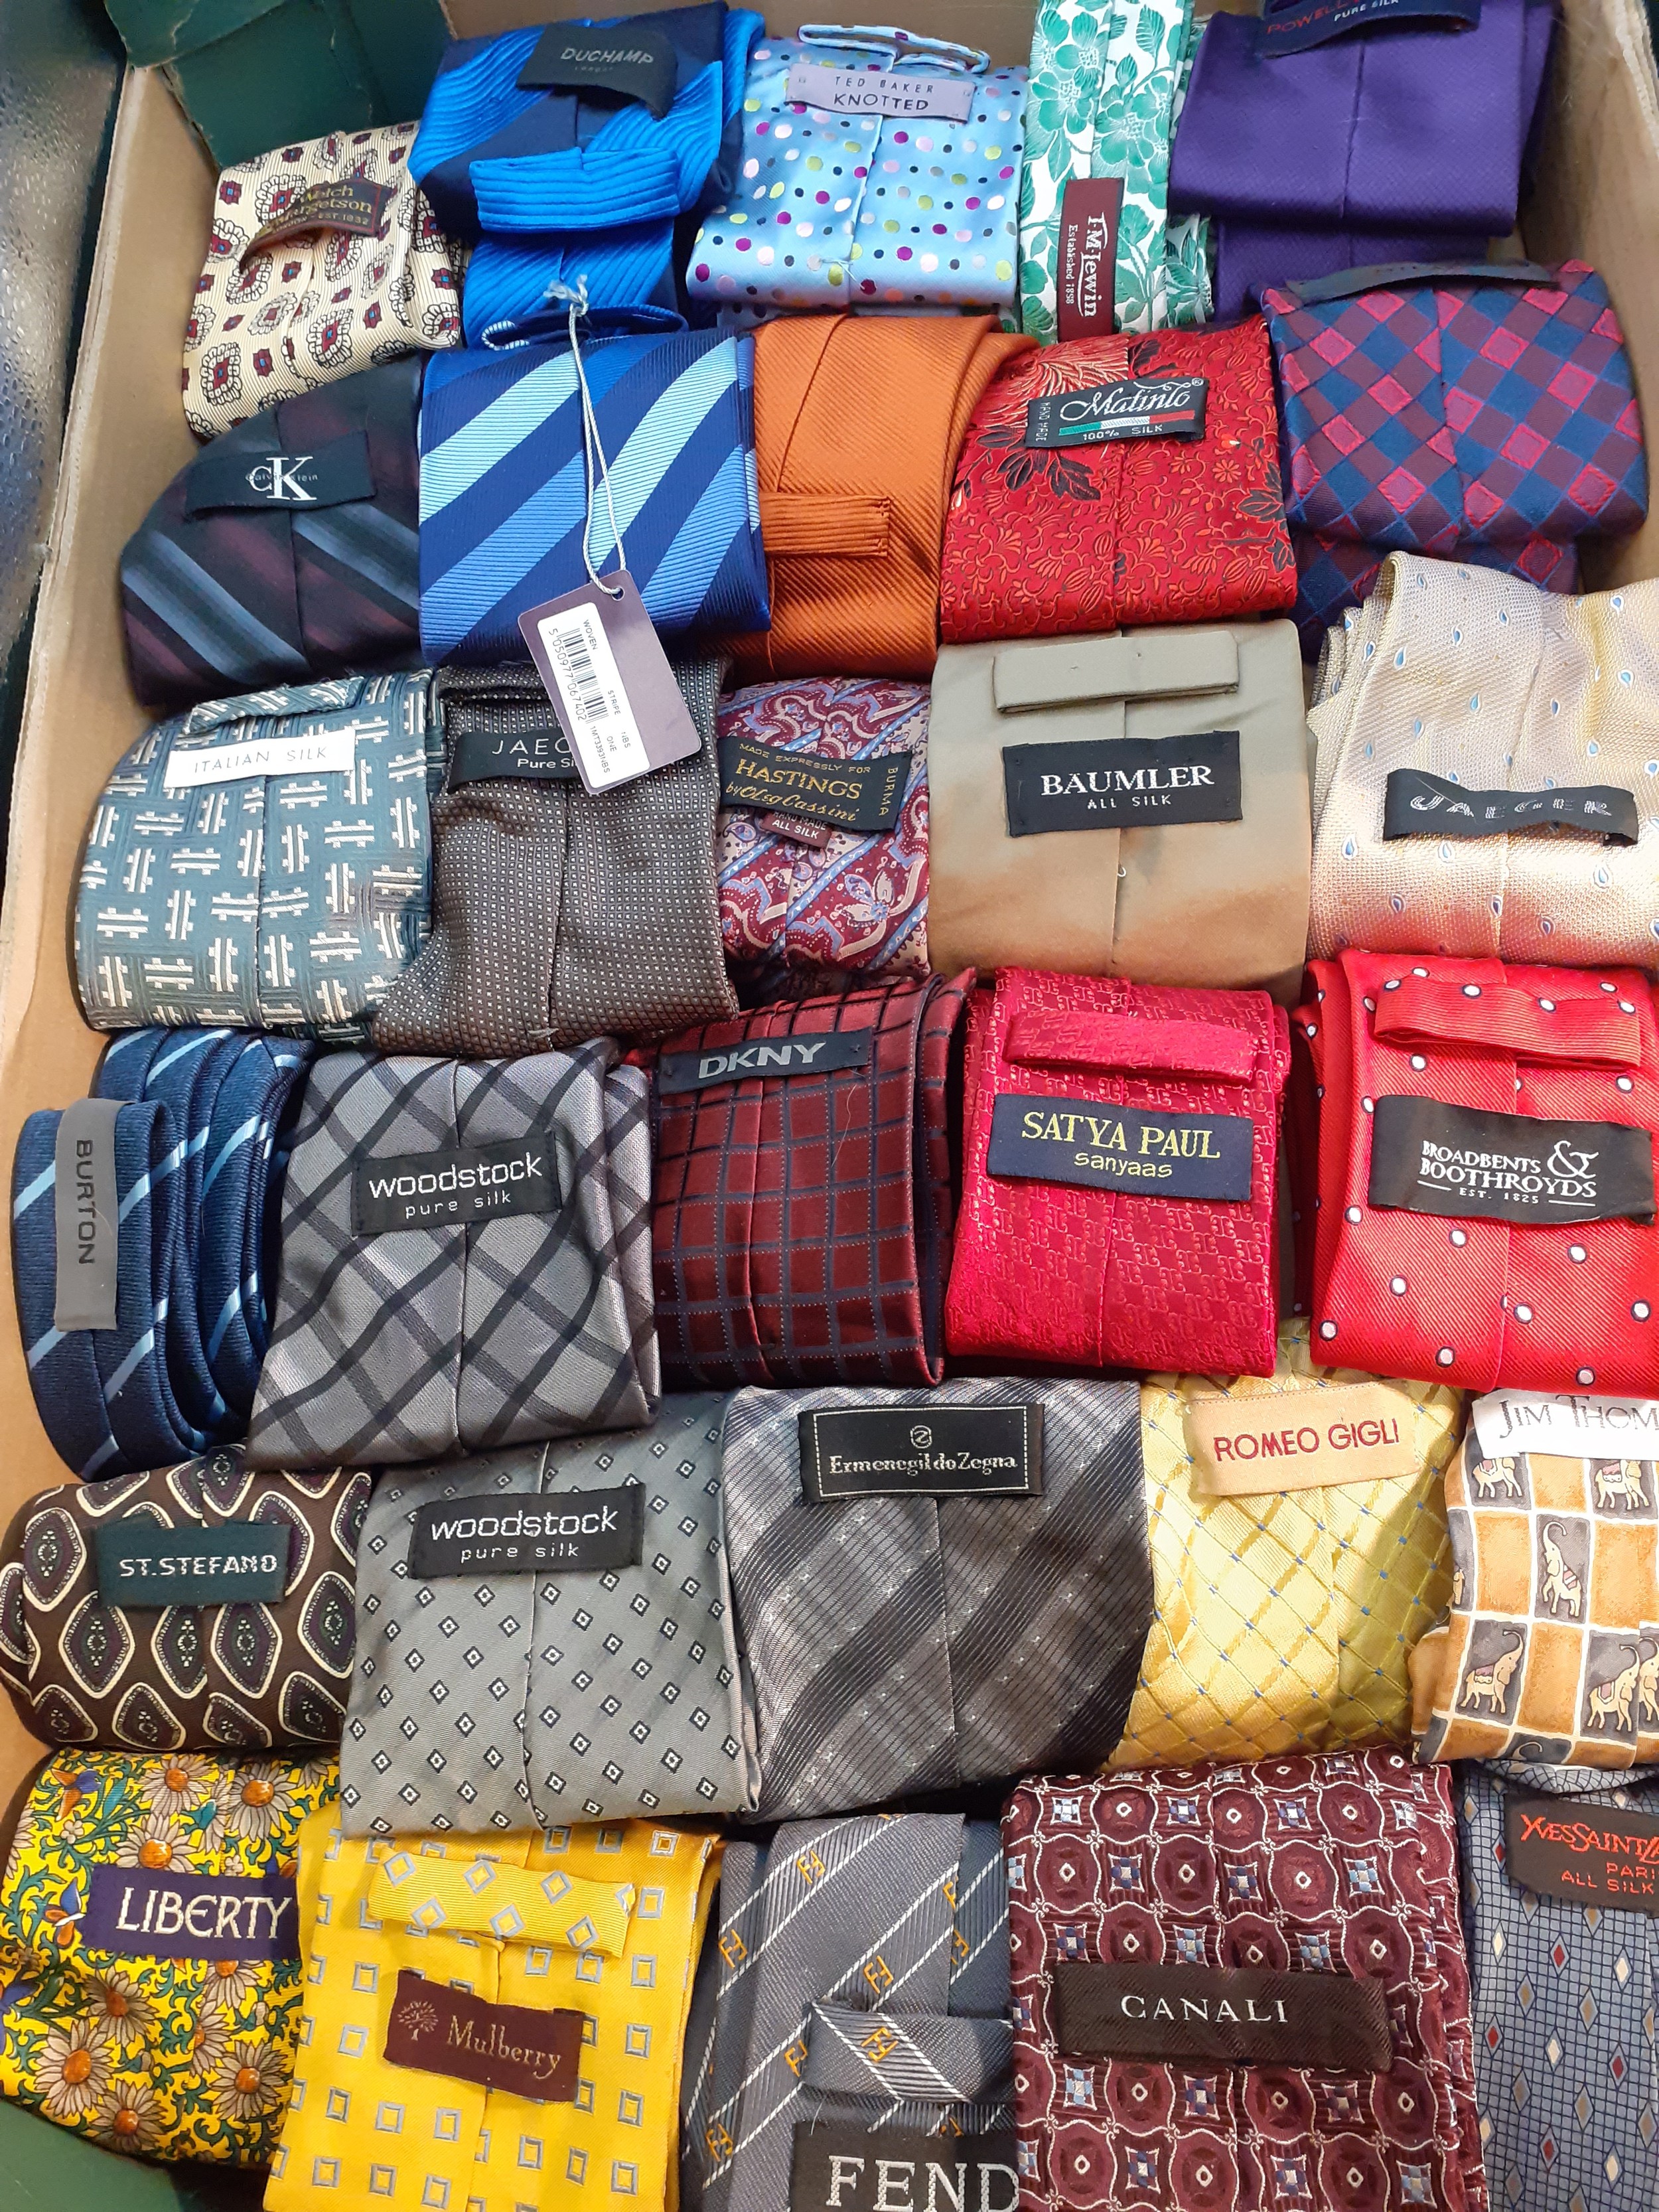 A quantity of 30 gents neck ties to include the designers Yves Saint Laurent, liberty, Mulberry, - Image 2 of 2